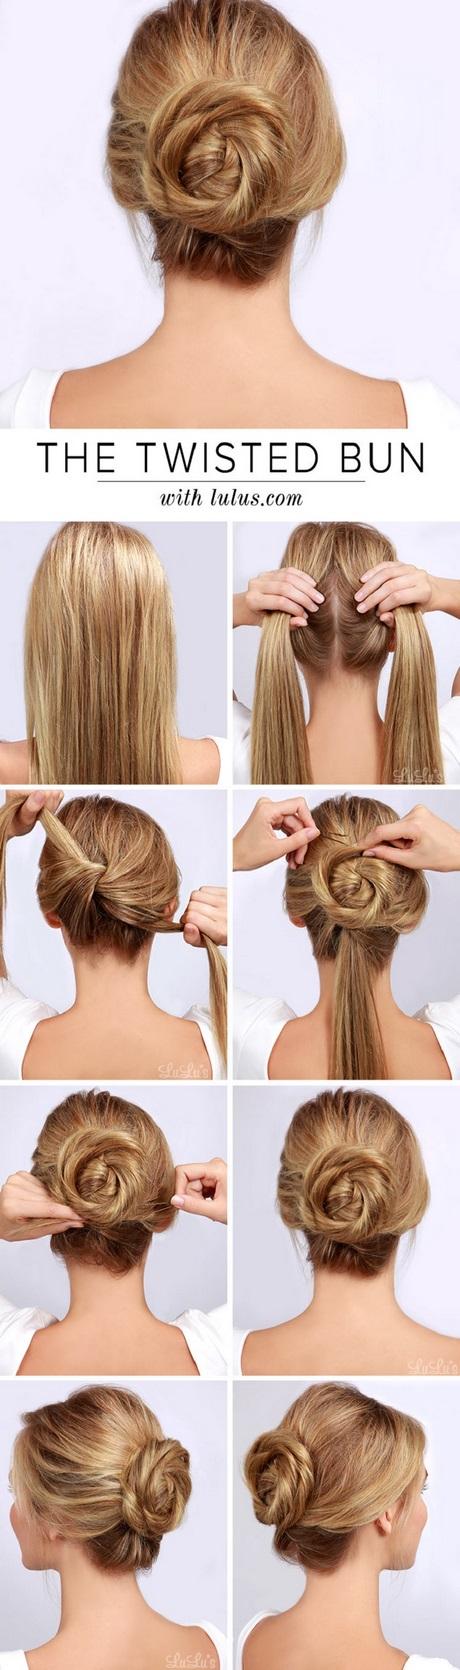 Simple and gorgeous hairstyles simple-and-gorgeous-hairstyles-02